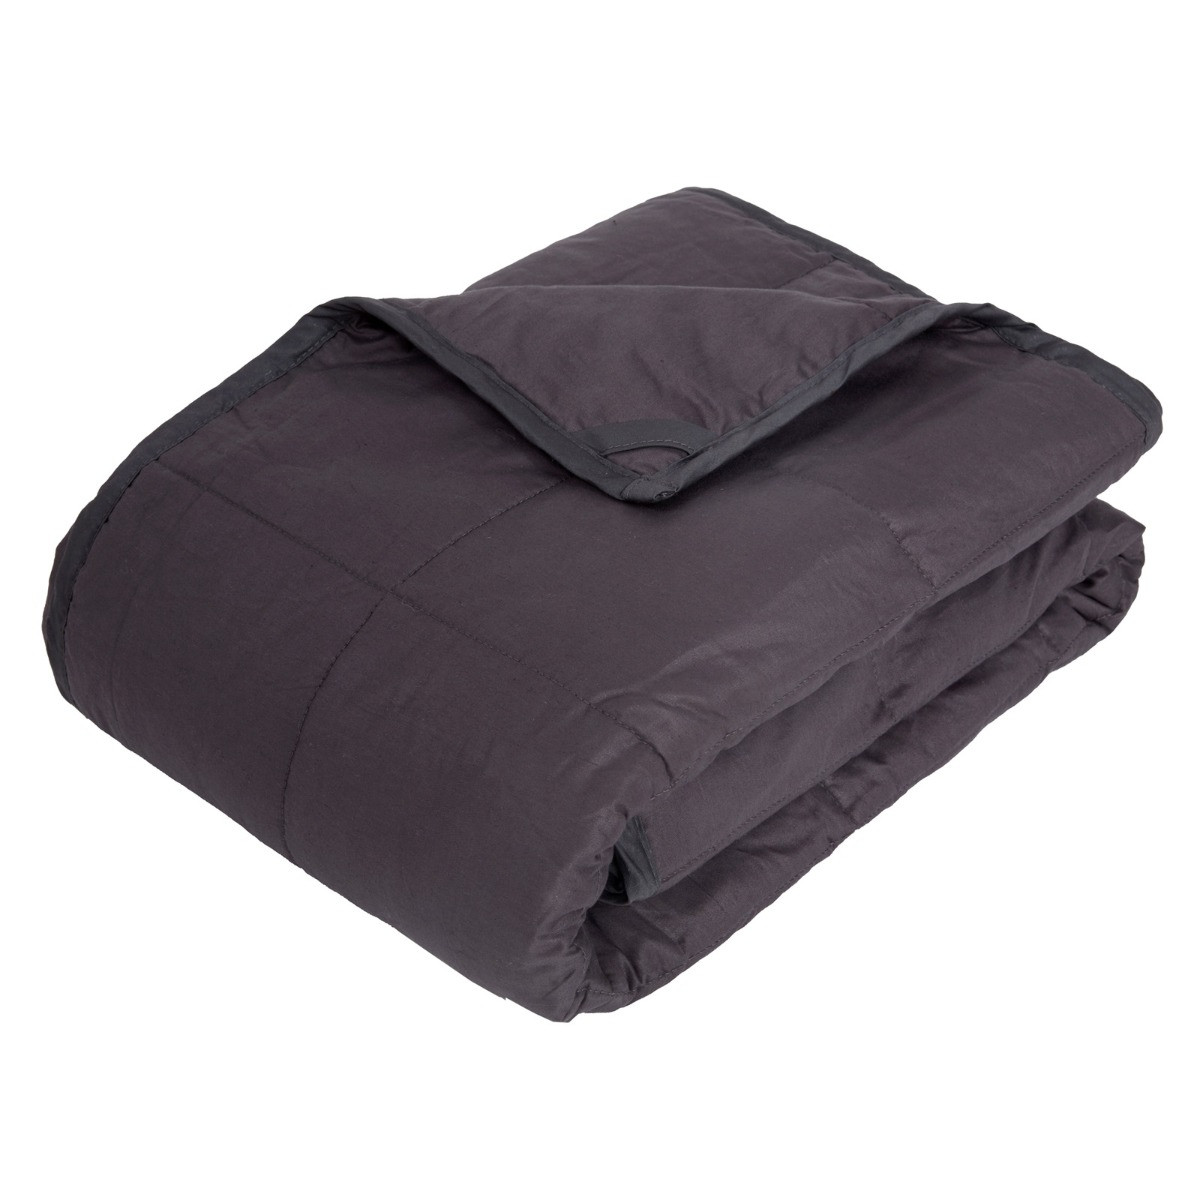 Highams Weighted Blanket Quilted Grey, 125 x 180 cm - 6kg>